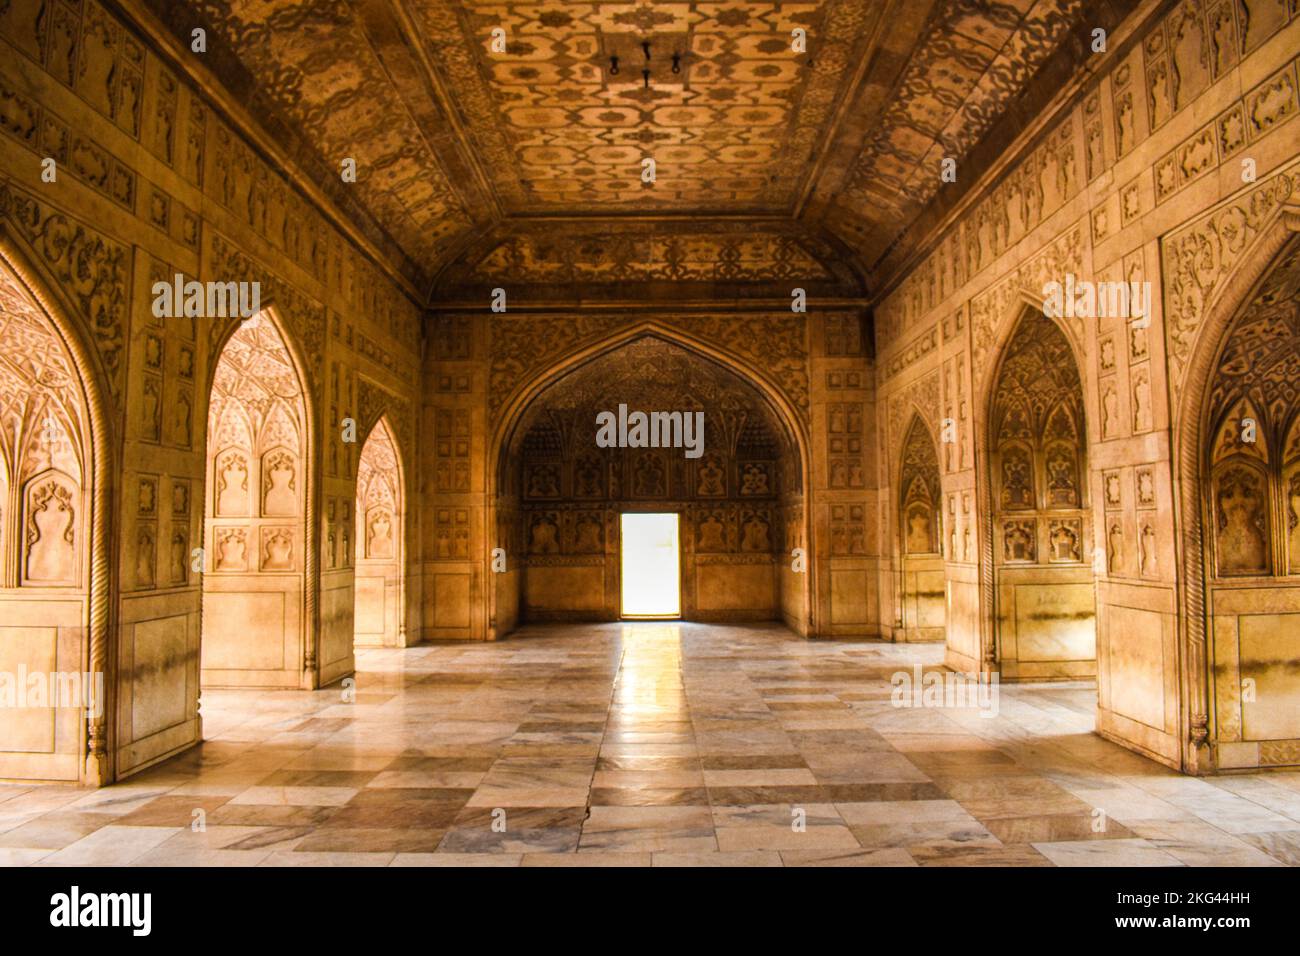 The Interior of Agra Fort . Stock Photo